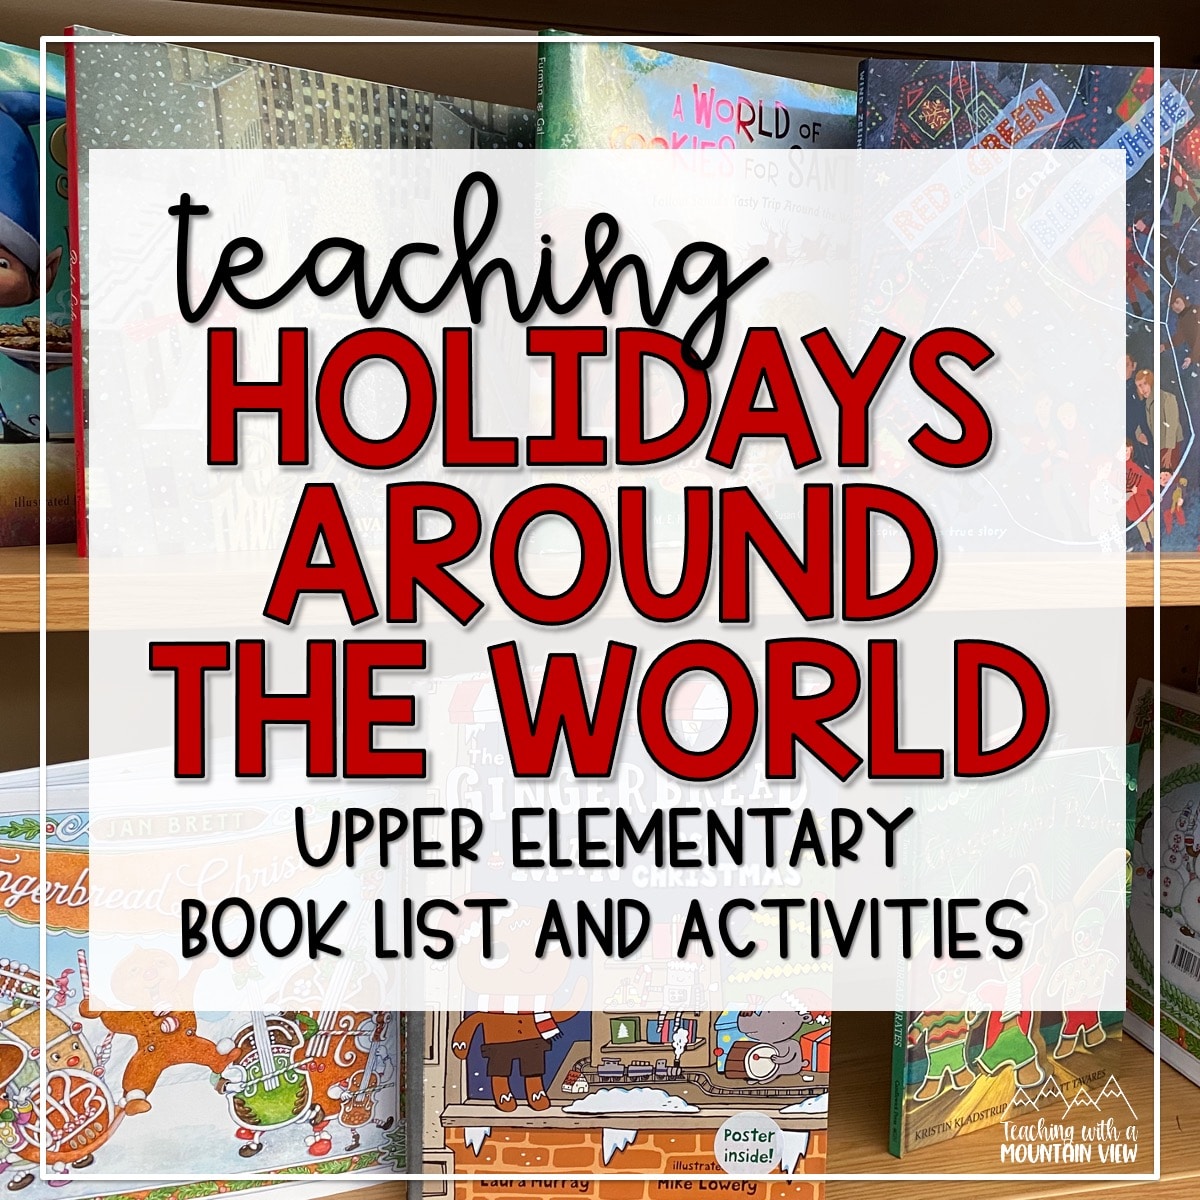 Upper elementary holidays around the world teaching resources for literacy and math. Includes book list and educational projects.